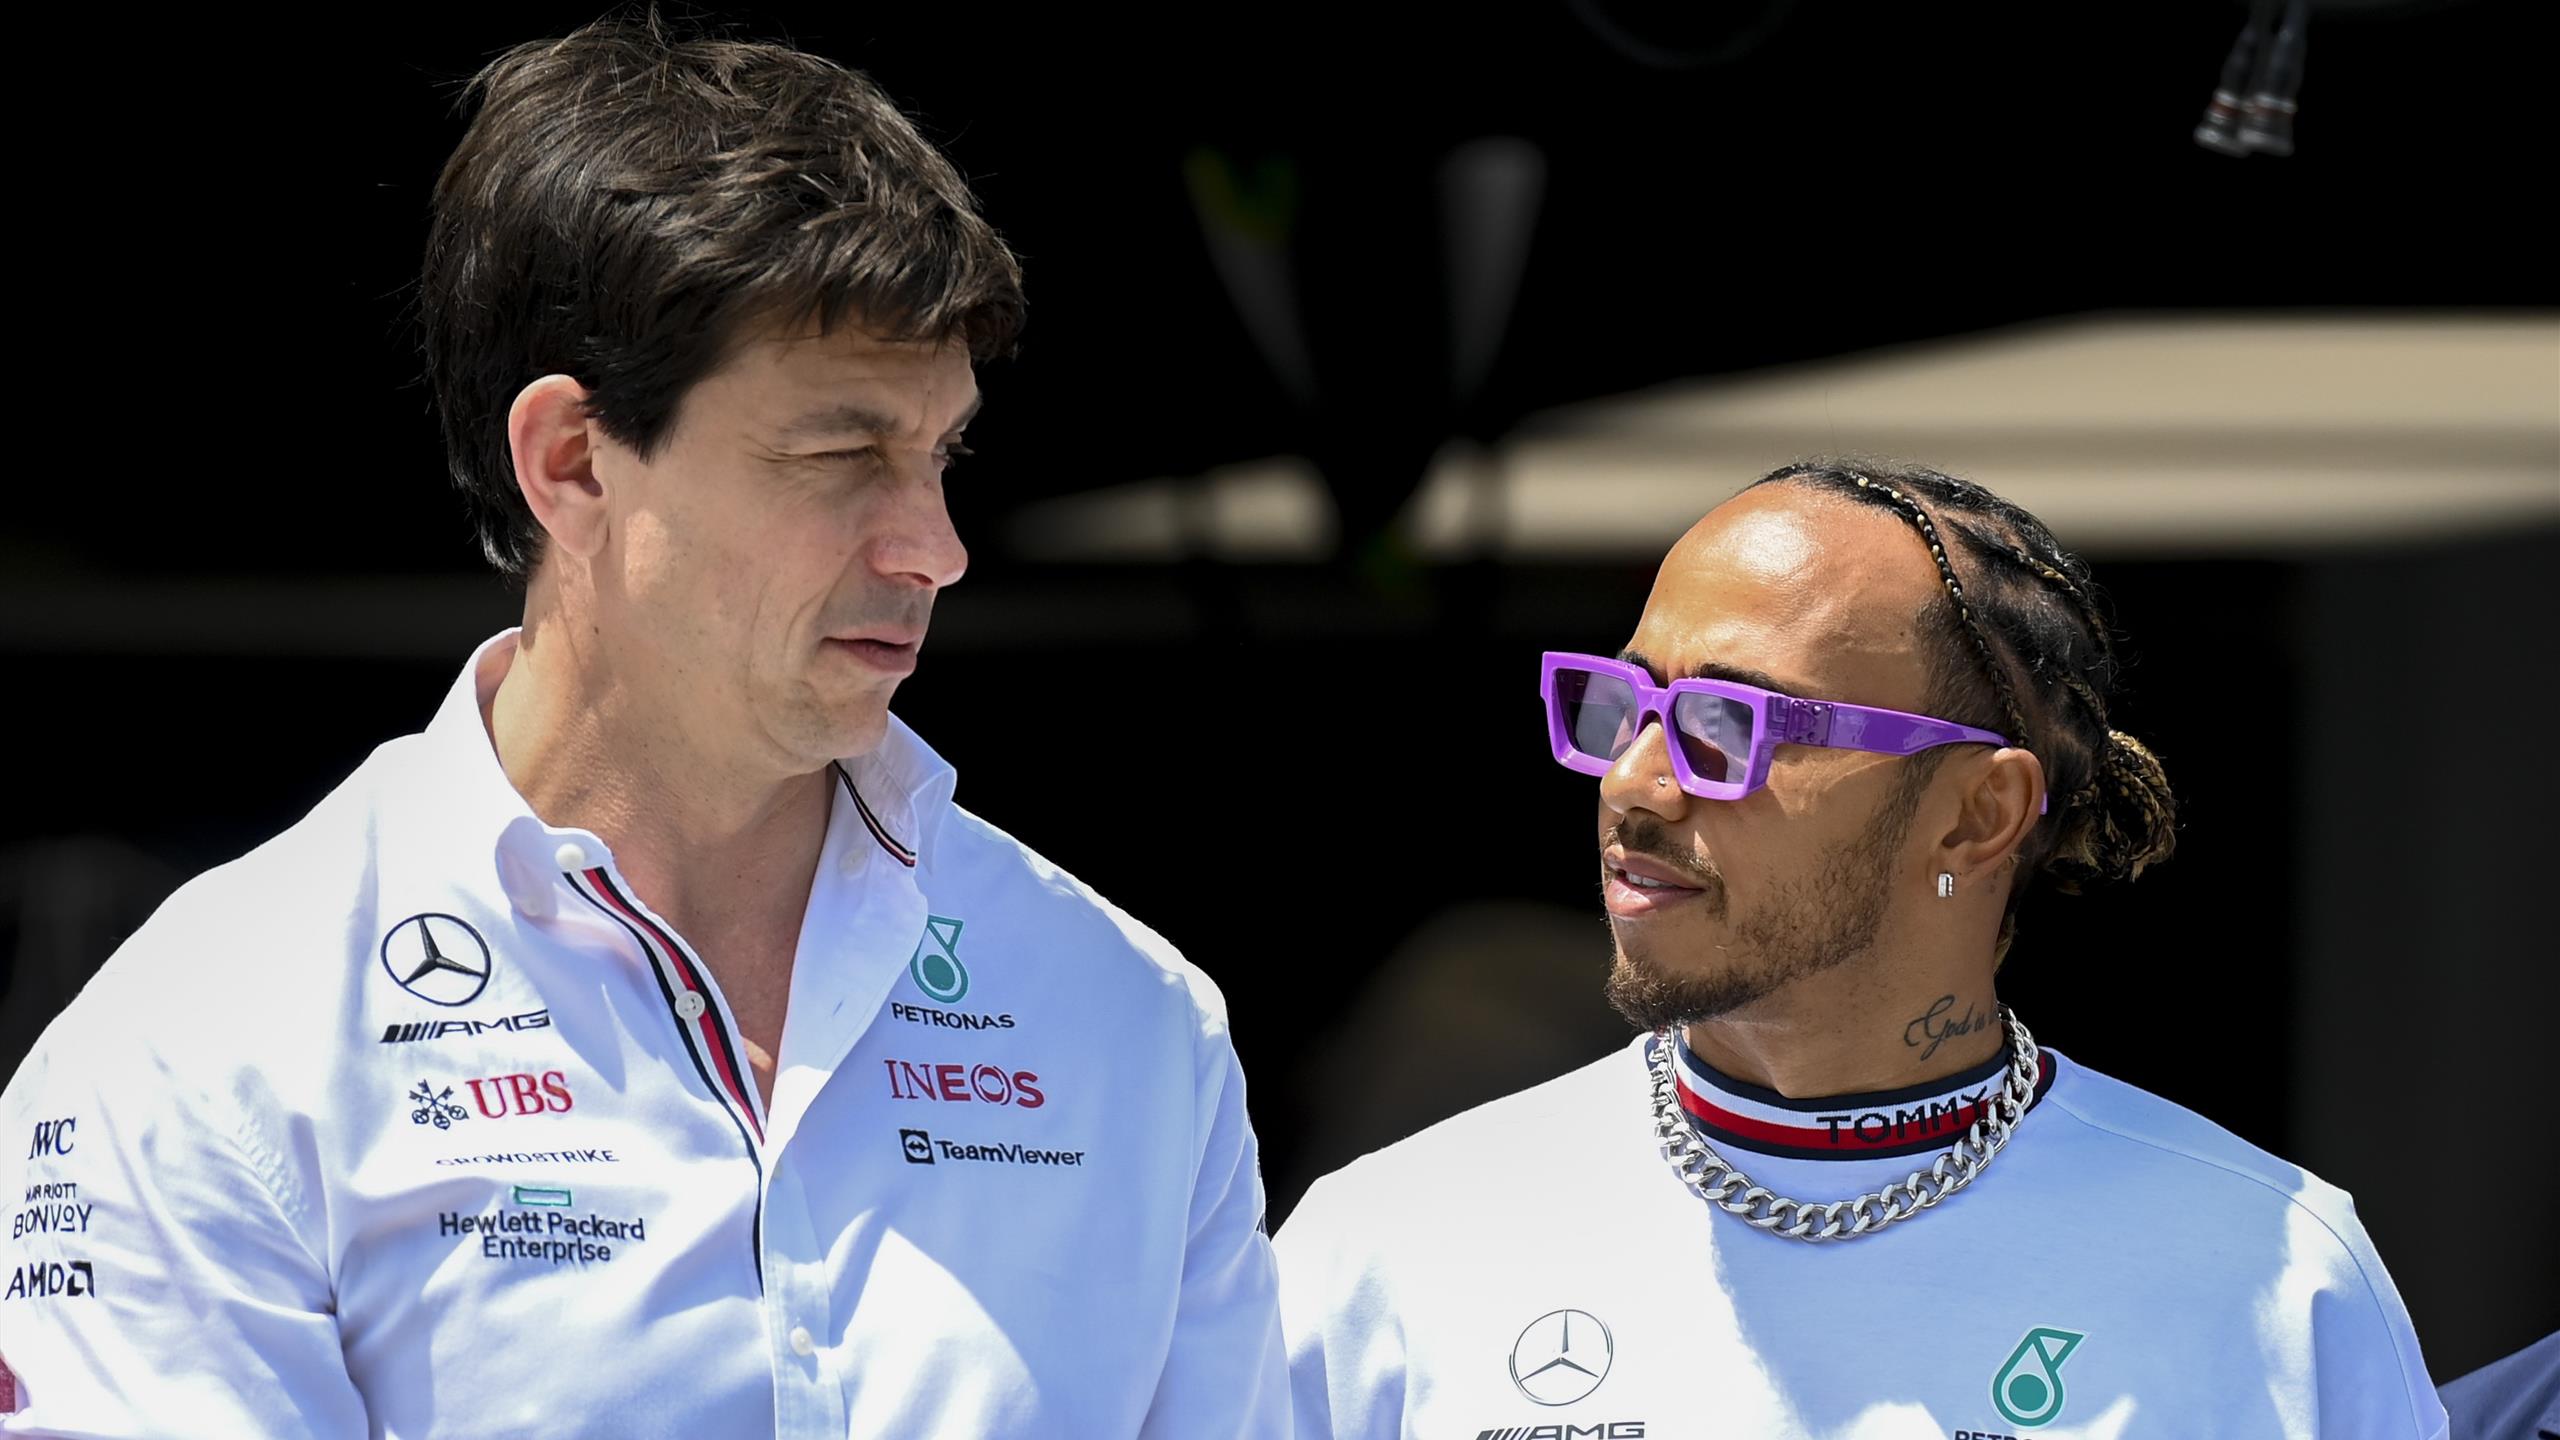 Bernie Ecclestone attacks Lewis Hamilton sharply and claims: Toto Wolff is tired of the record world champion